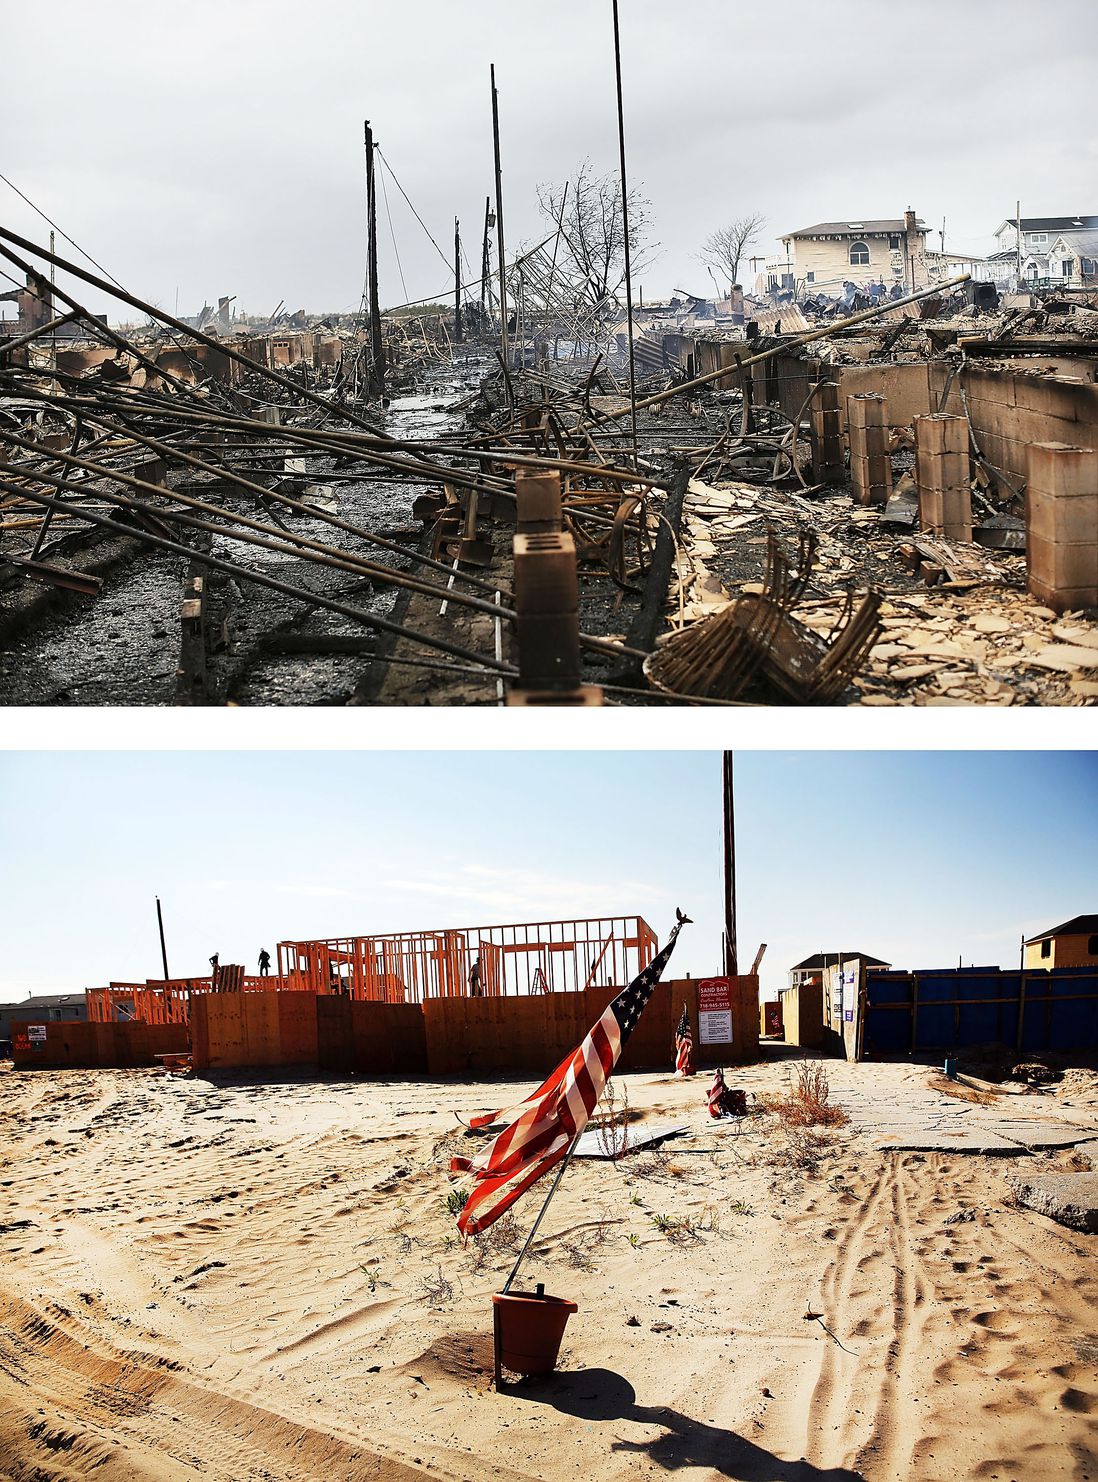 [Top] Homes sit destroyed after Hurricane Sandy on October 30, 2012 in the Breezy Point neighborhood of the Queens borough of New York City. [Bottom] Workers construct new homes on October 23, 2013 in the Breezy Point neighborhood of the Queens borough of New York City.